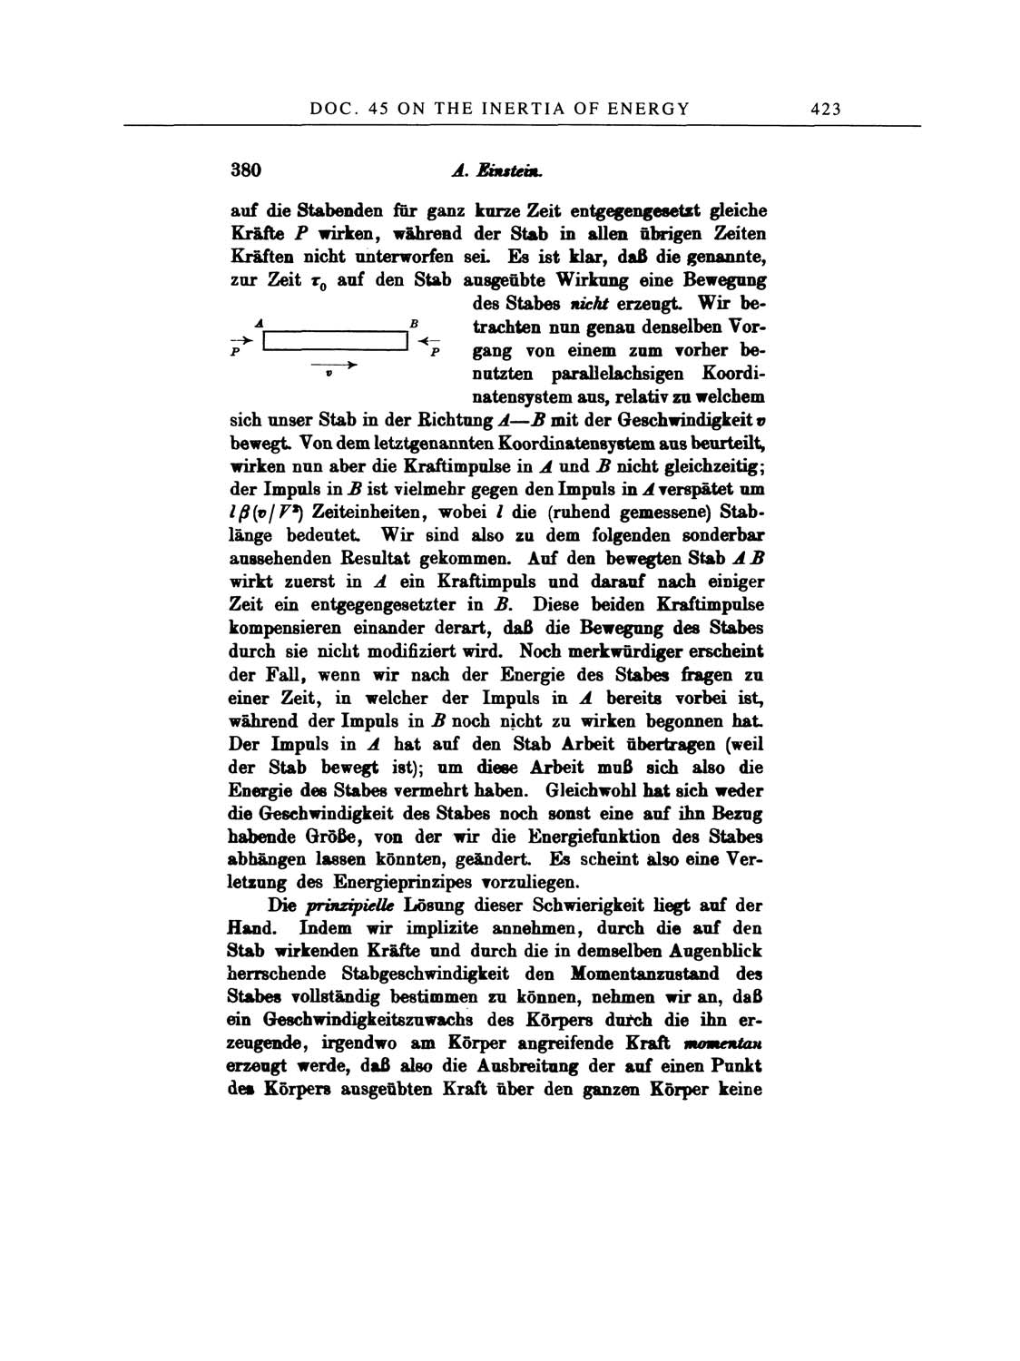 Volume 2: The Swiss Years: Writings, 1900-1909 page 423